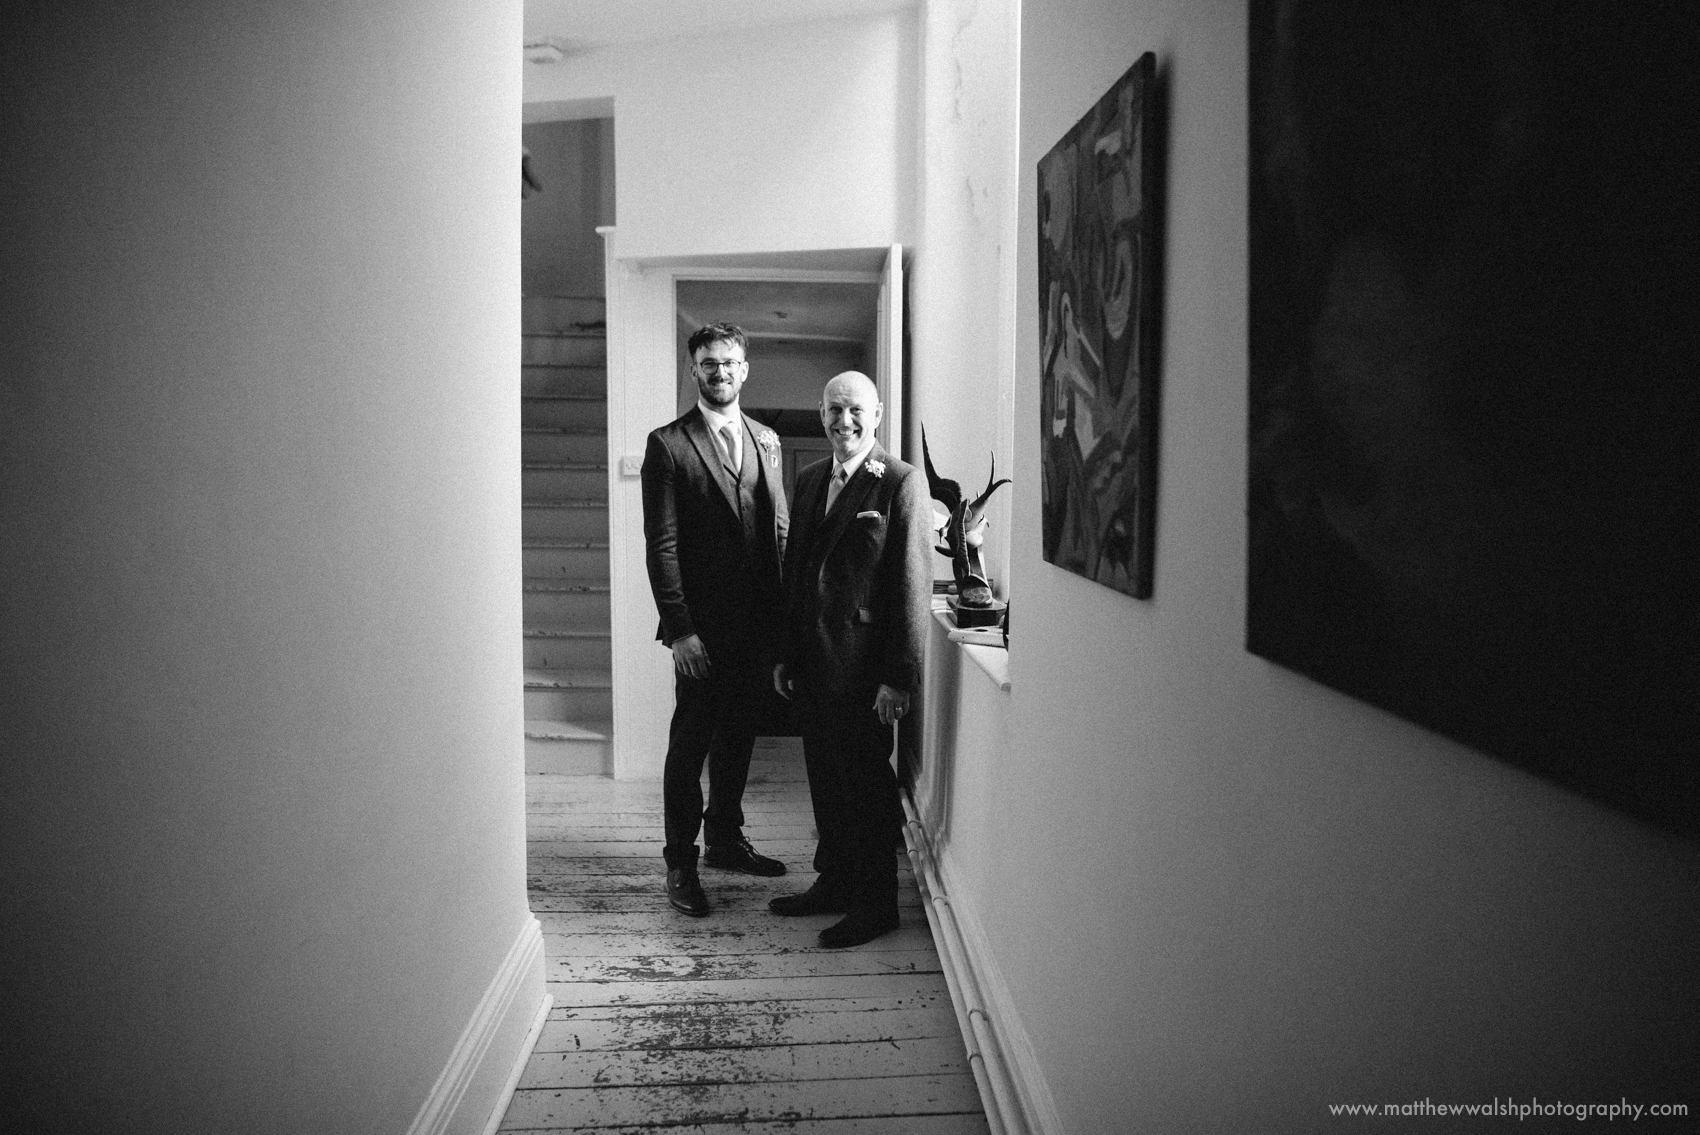 Father of the bride and brother pose for a picture together in the hallway of the main house